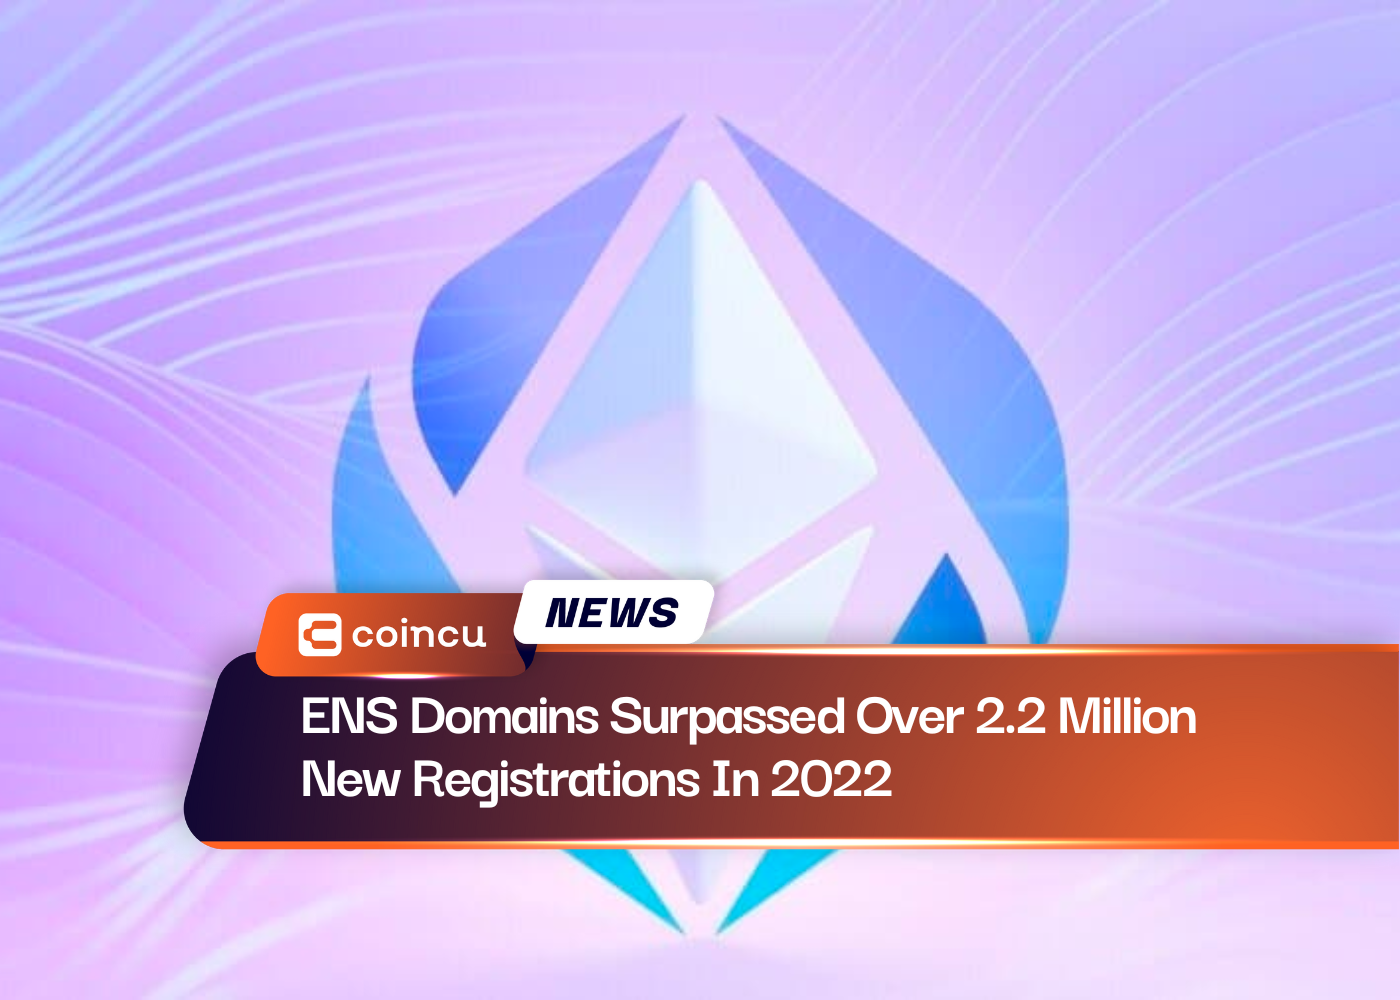 ENS Domains Surpassed Over 2.2 Million New Registrations In 2022